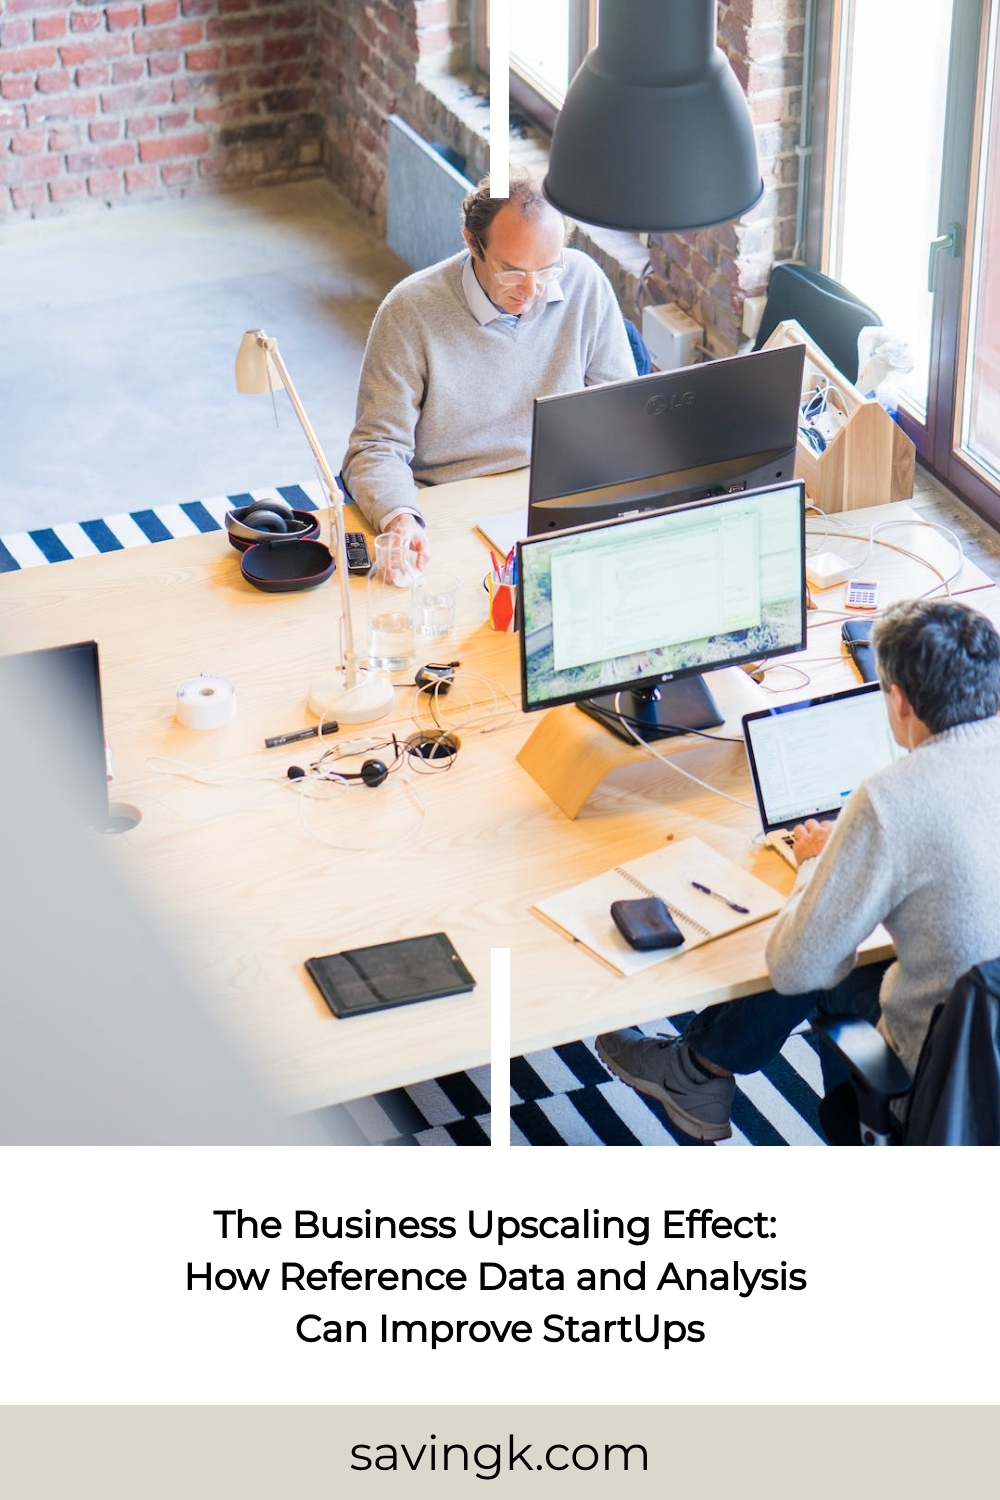 The Business Upscaling Effect: How Reference Data and Analysis Can Improve StartUps